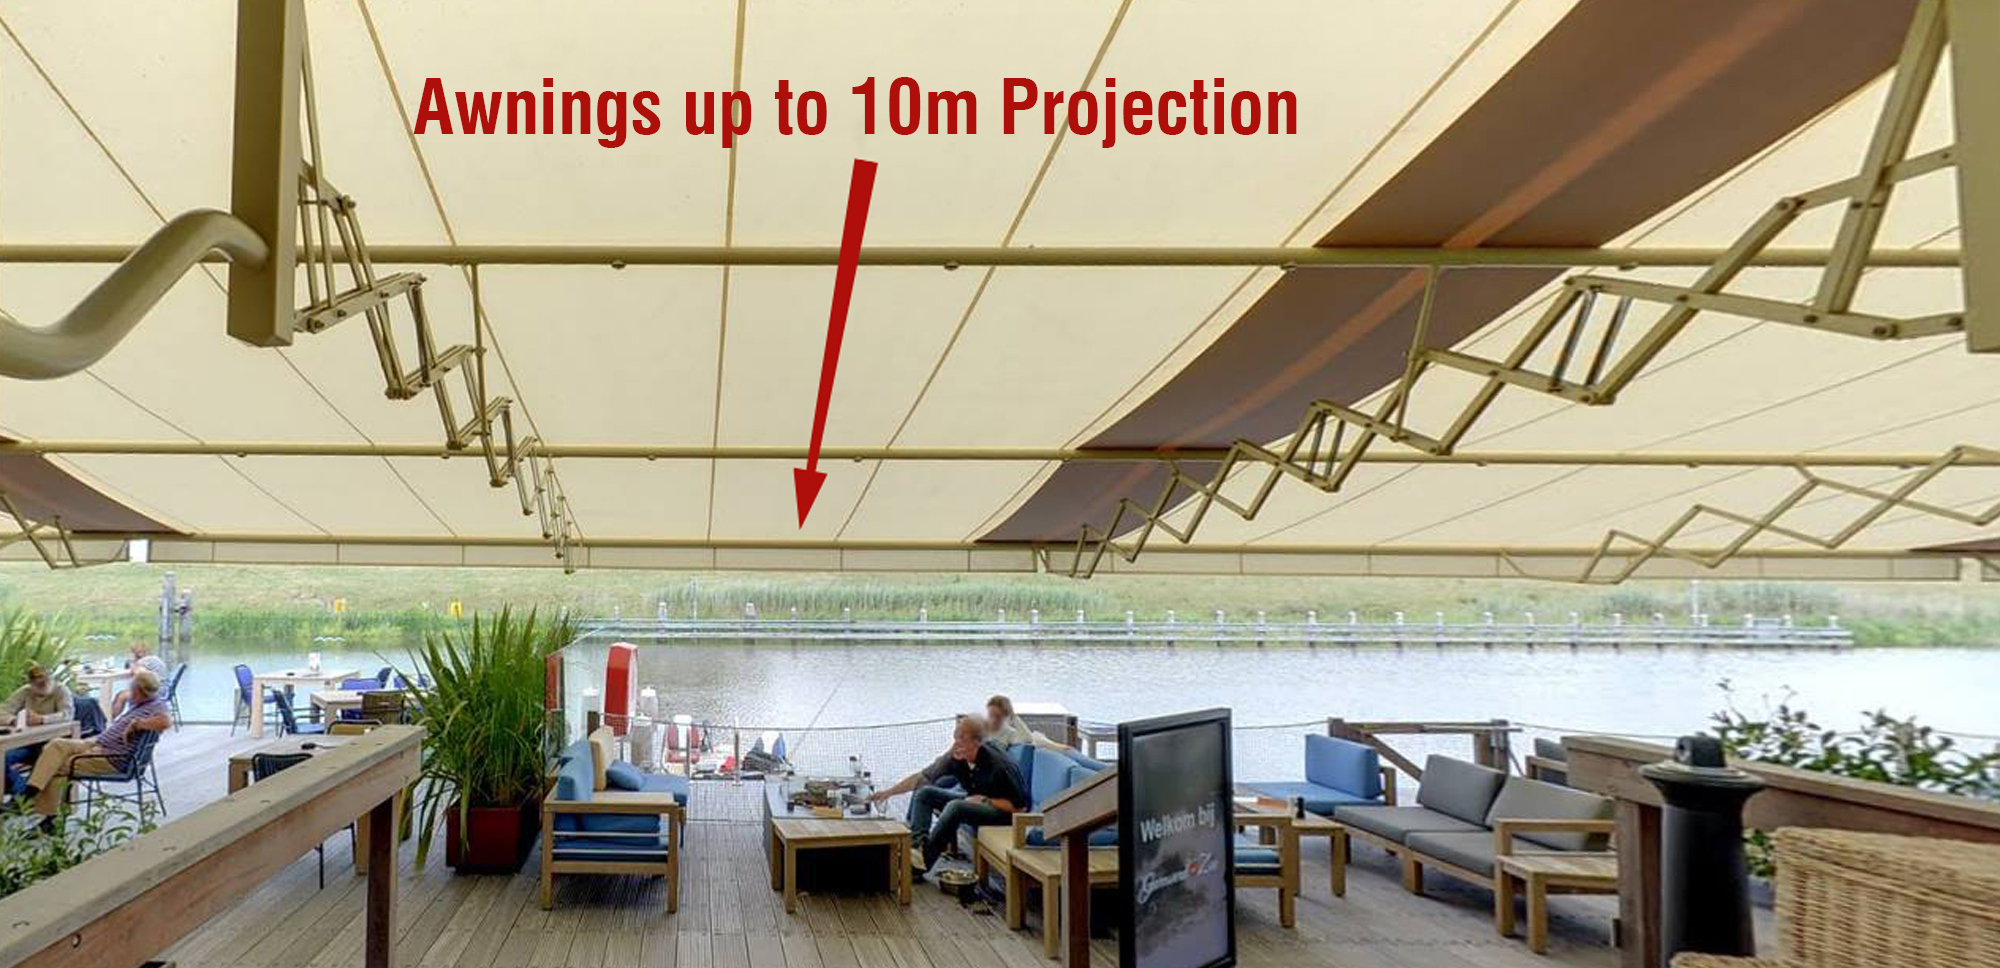 Awnings up to 10m Projection